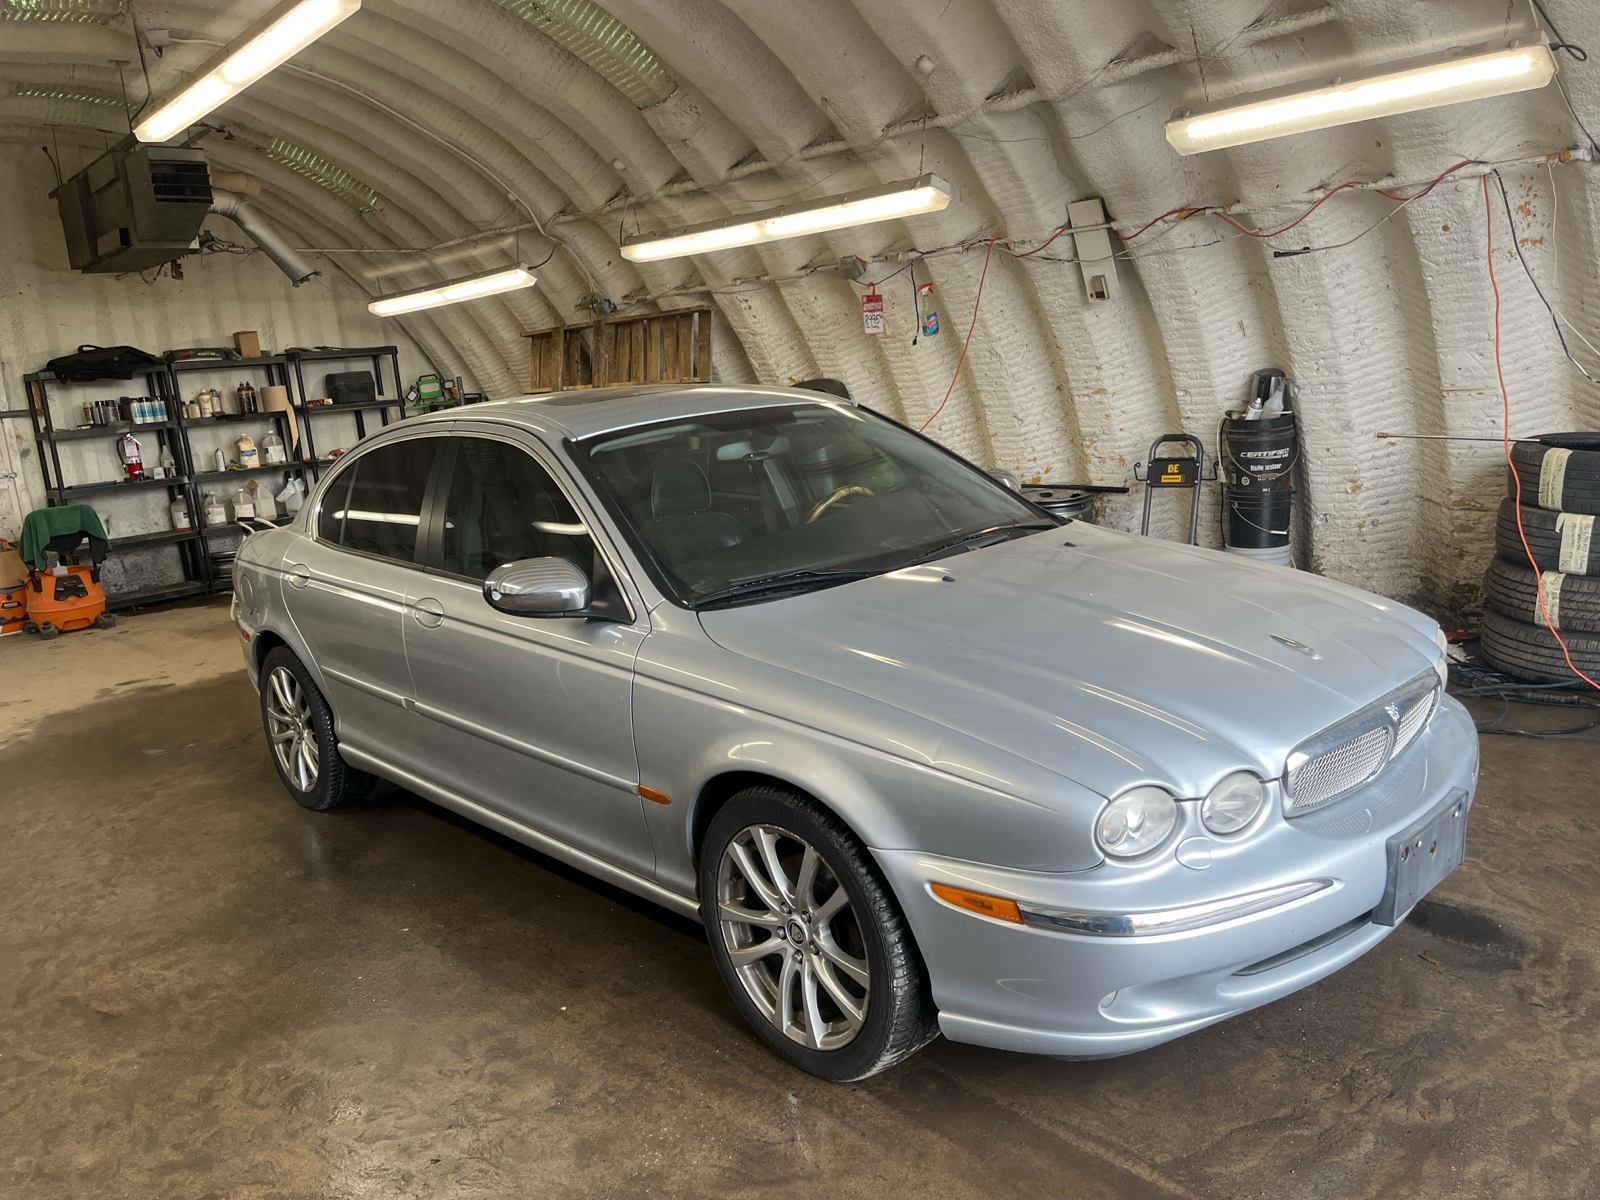 2007 Jaguar X-Type *** AS-IS SALE *** YOU CERTIFY & YOU SAVE!!! *** A